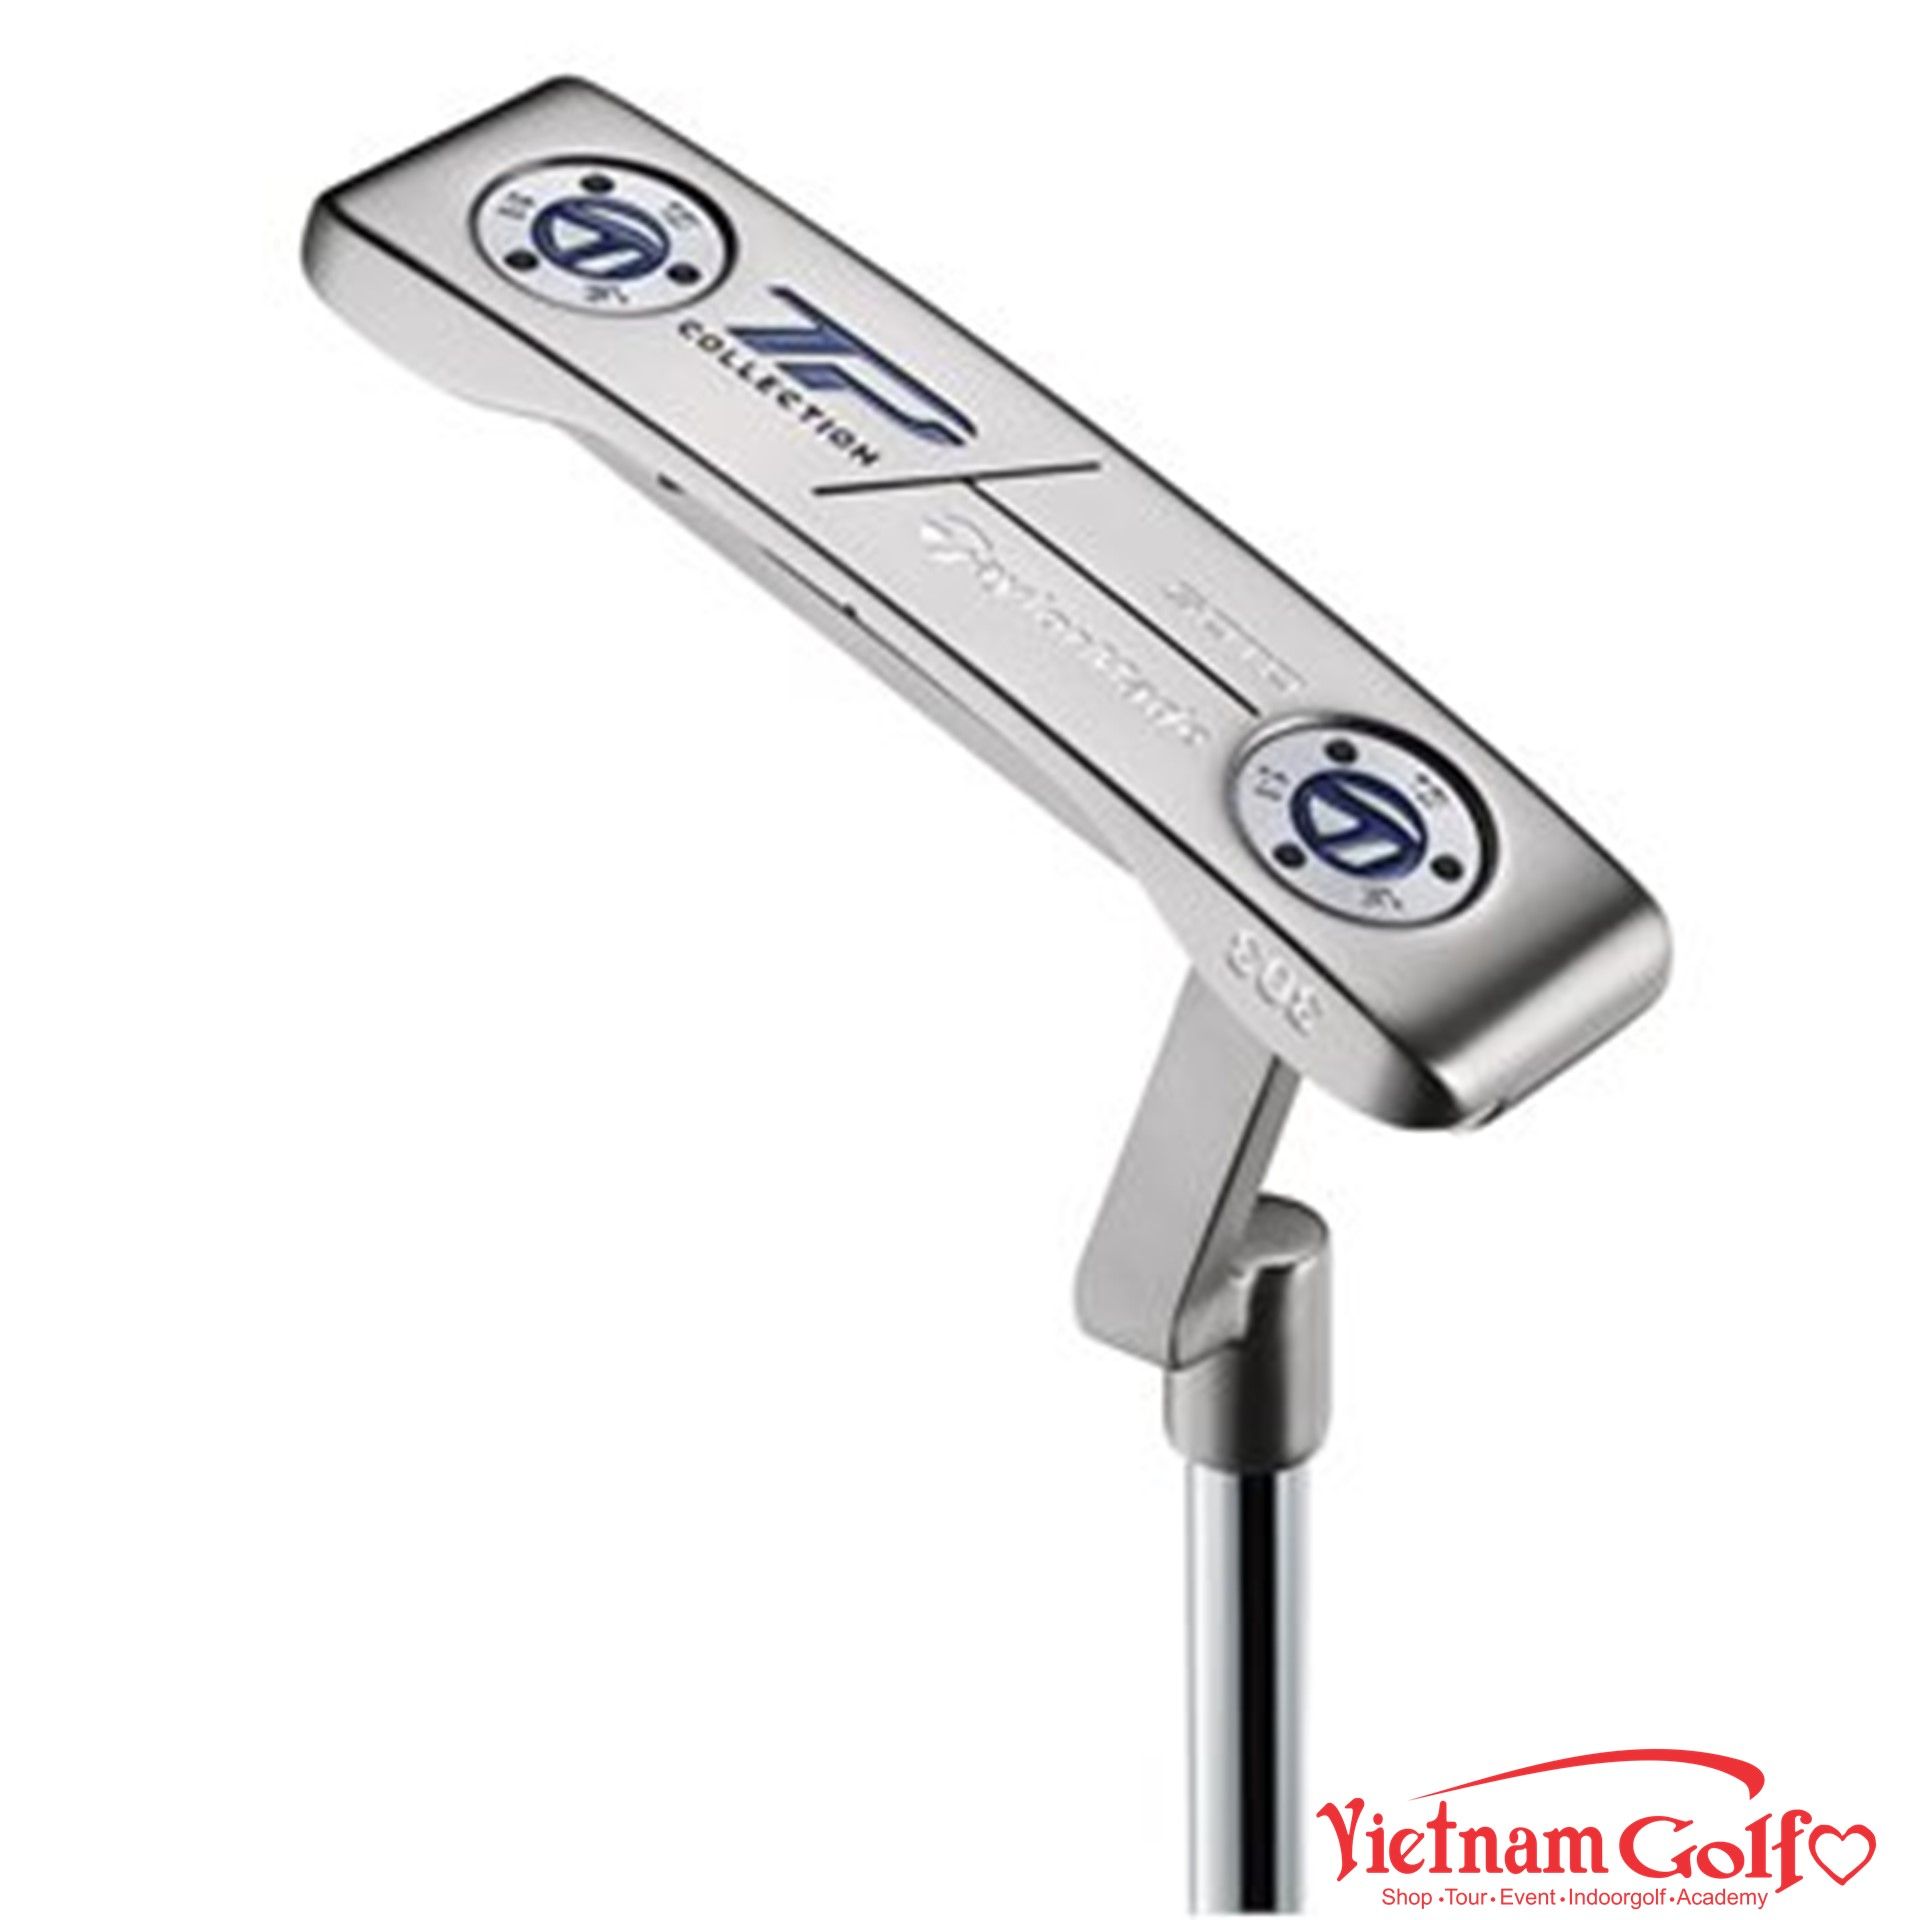 Gậy Putter Taylormade TP HydroBlast Soto